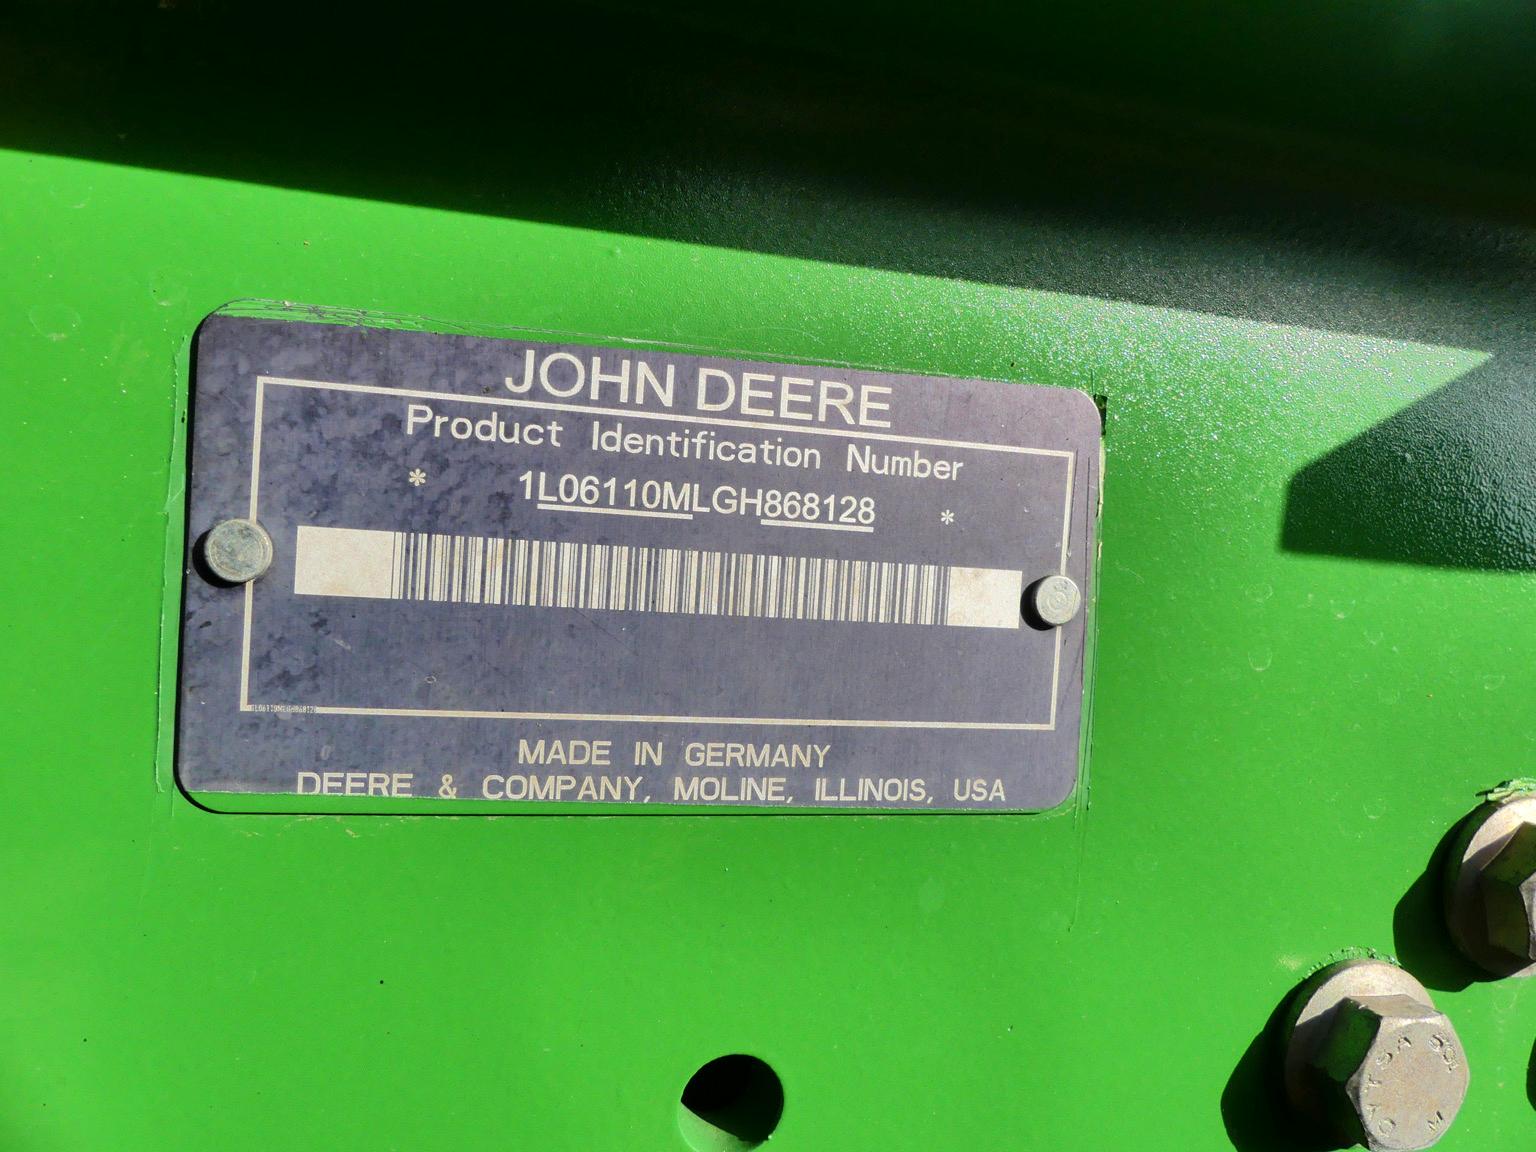 2016 John Deere 6110M MFWD Tractor, s/n 868128: C/A, 3 Hyd Remotes, 18.4-34